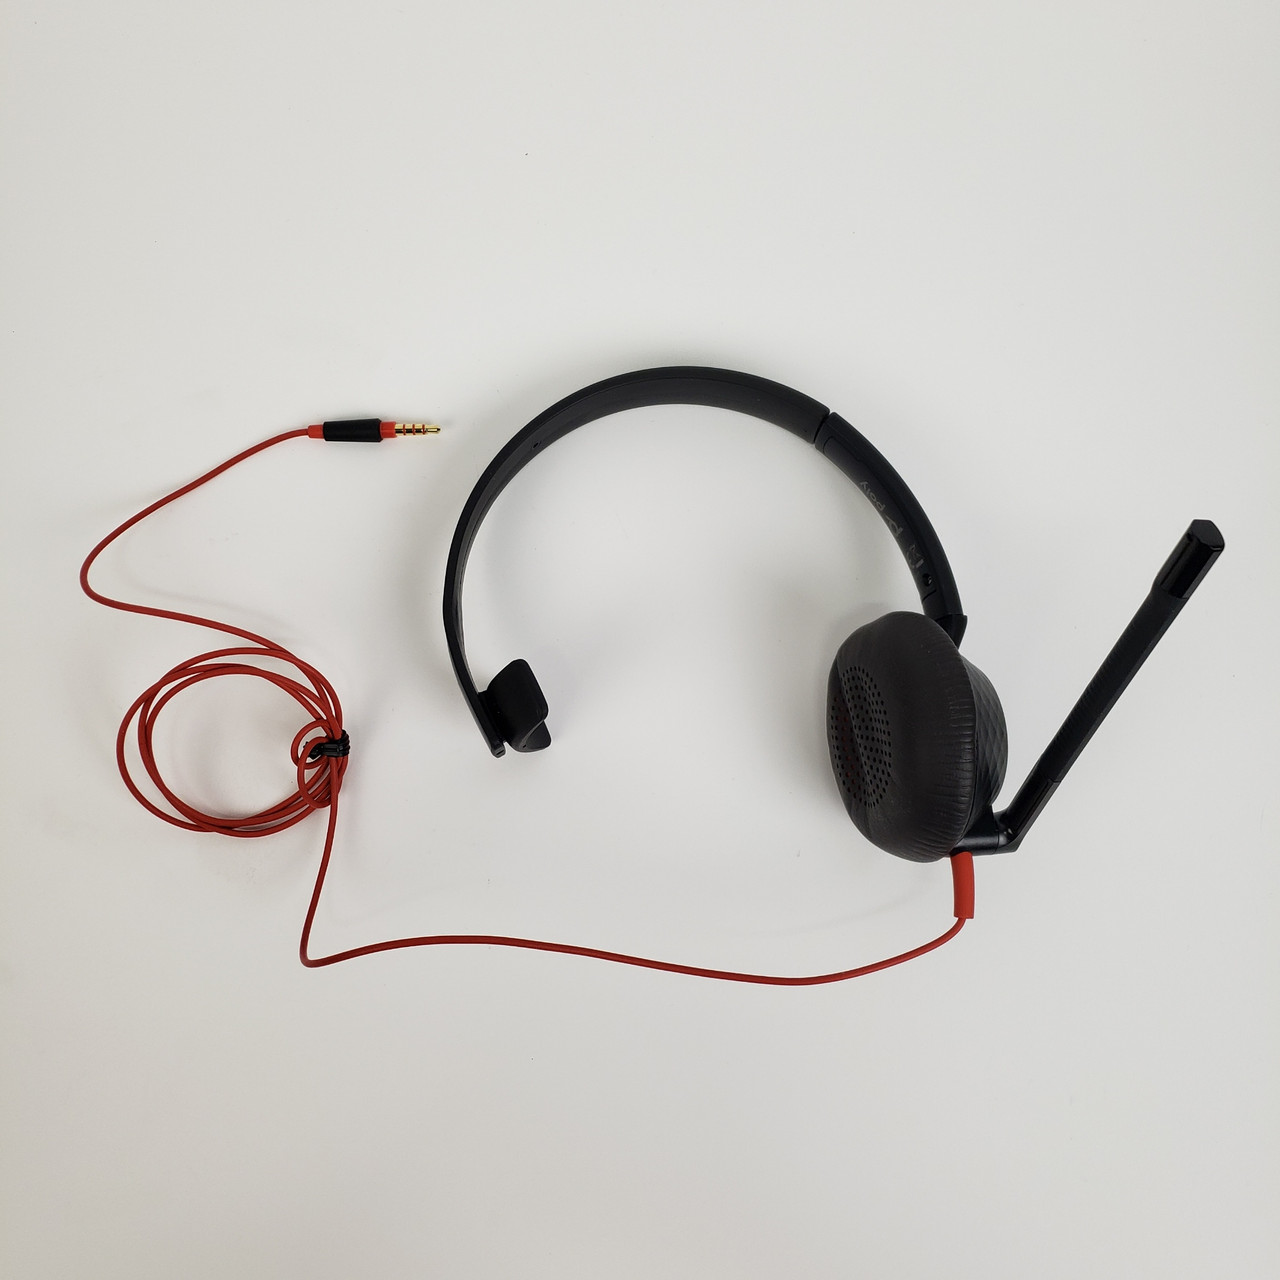 Poly Blackwire C5210T with C5210 Adapter USB Headset | Grade A